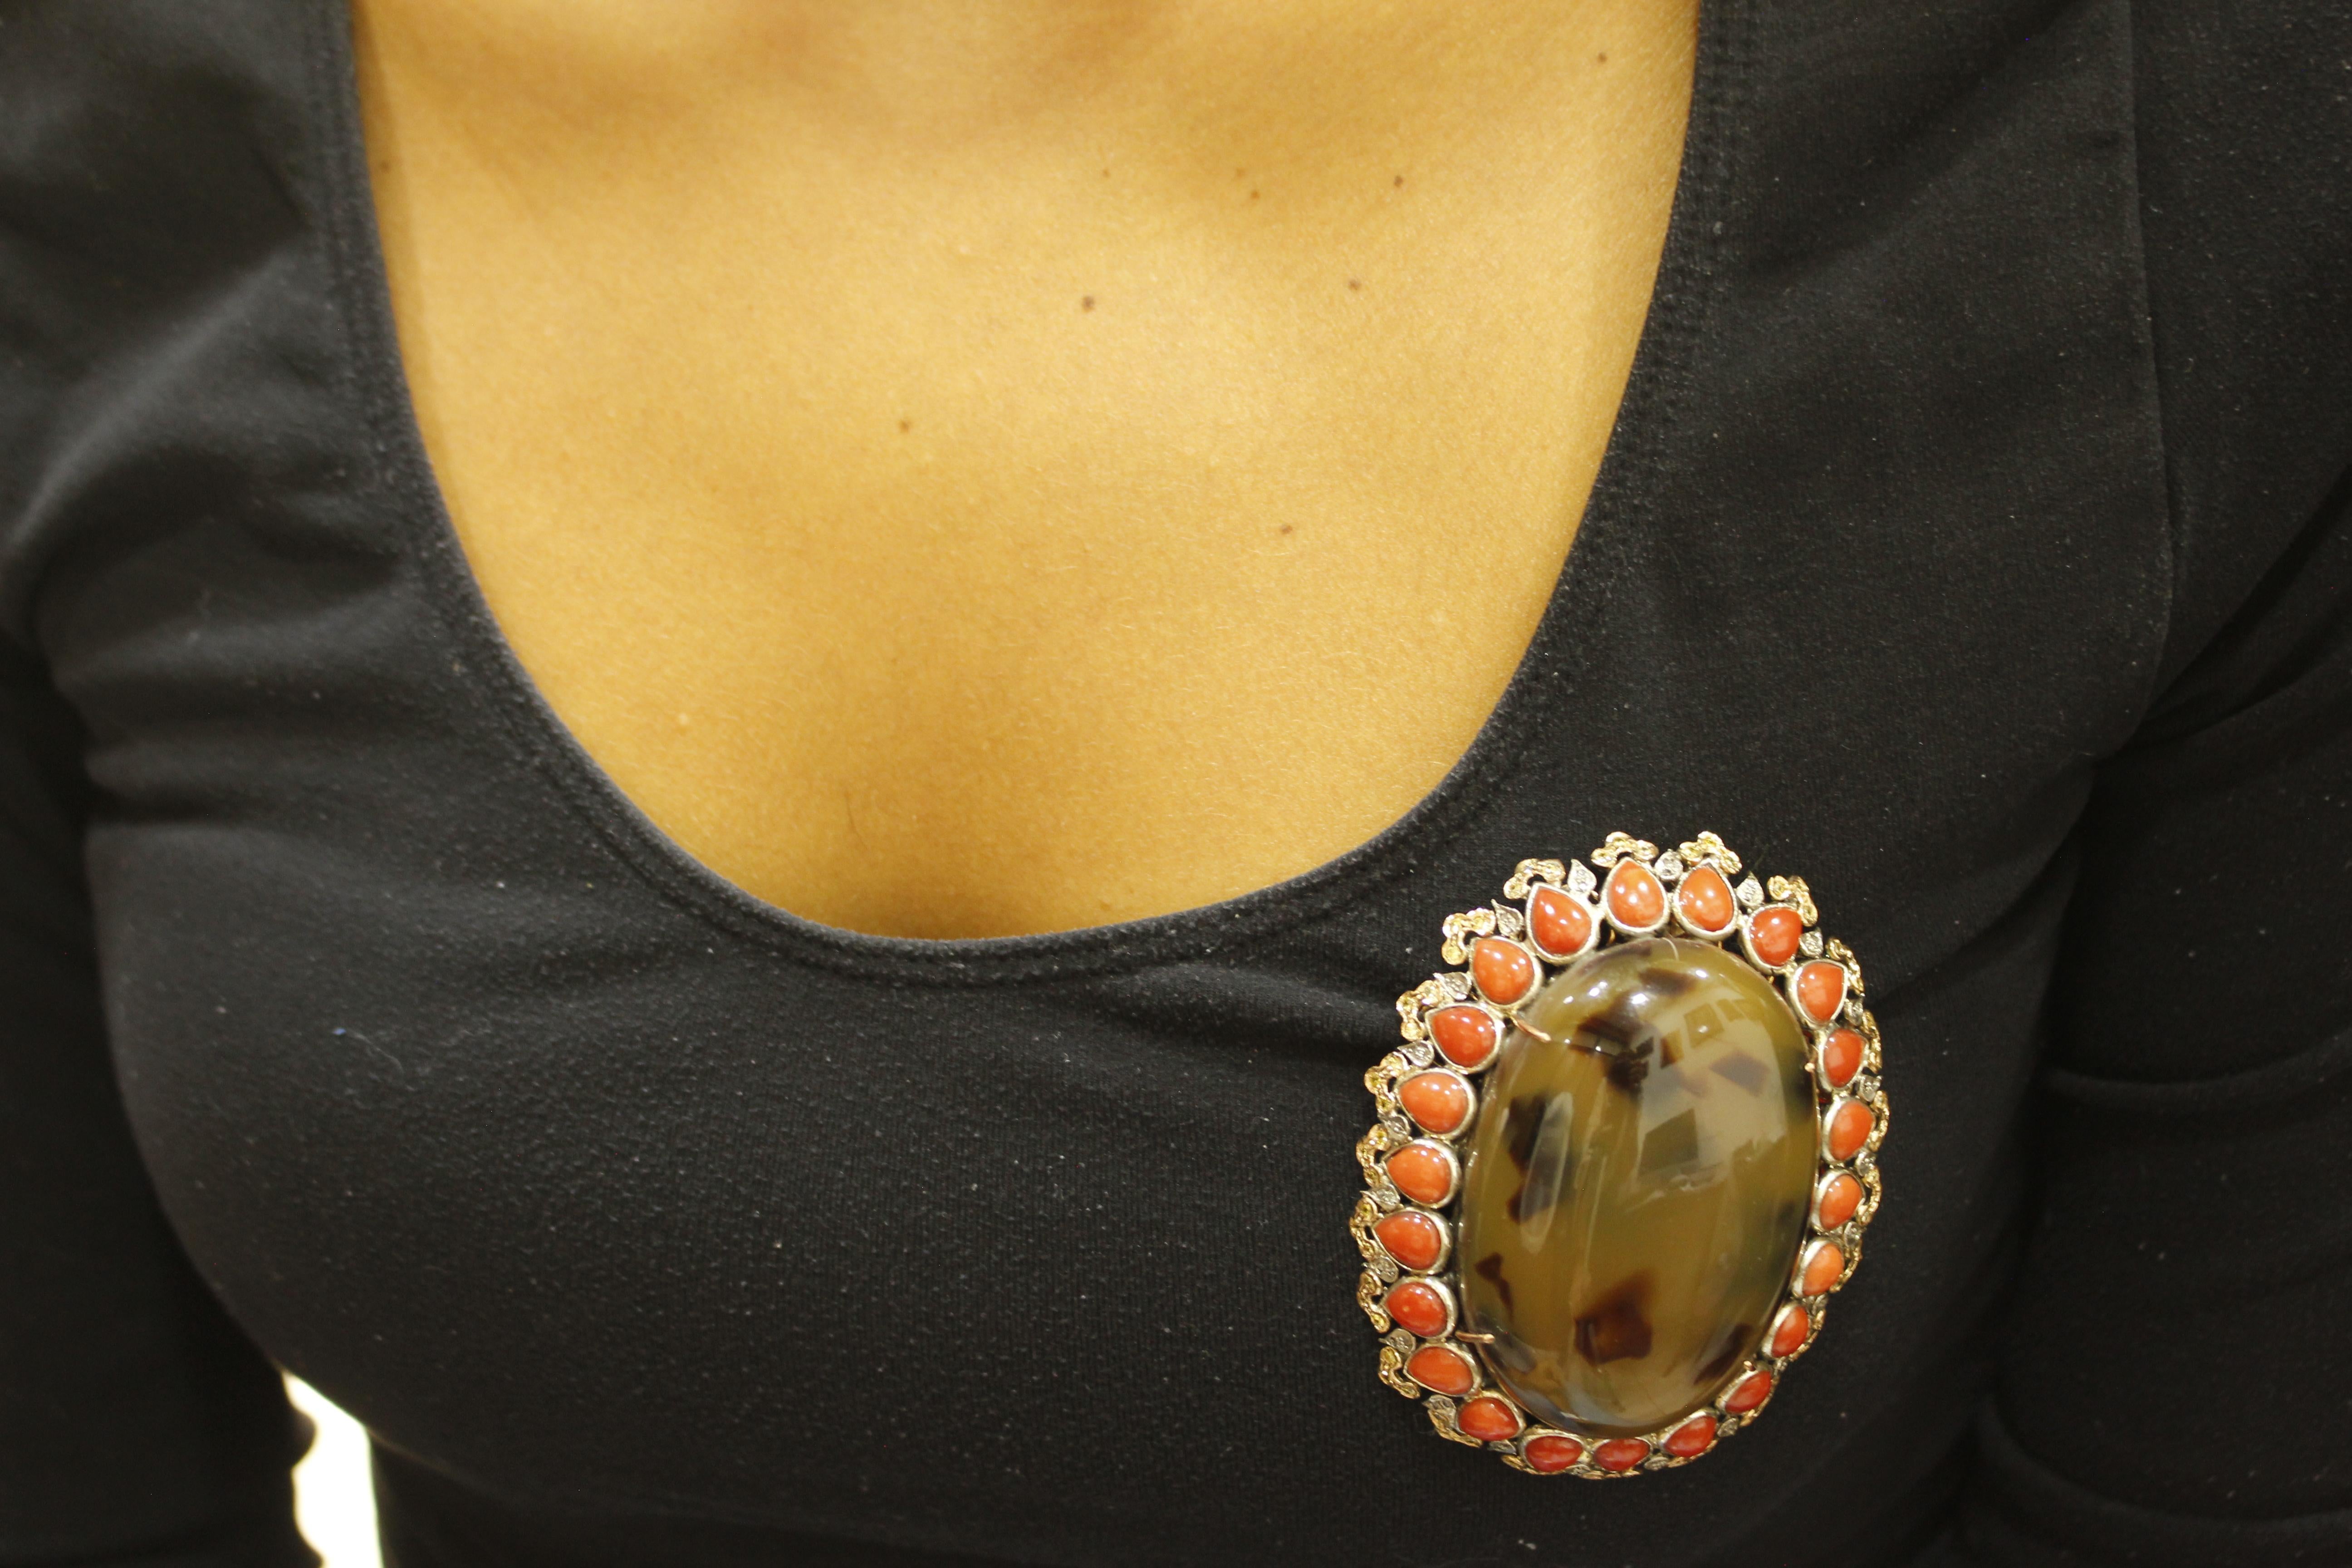 Diamonds, Yellow Sapphires, Red Coral Drops, Gold Silver Pendant Necklace/Brooch For Sale 2